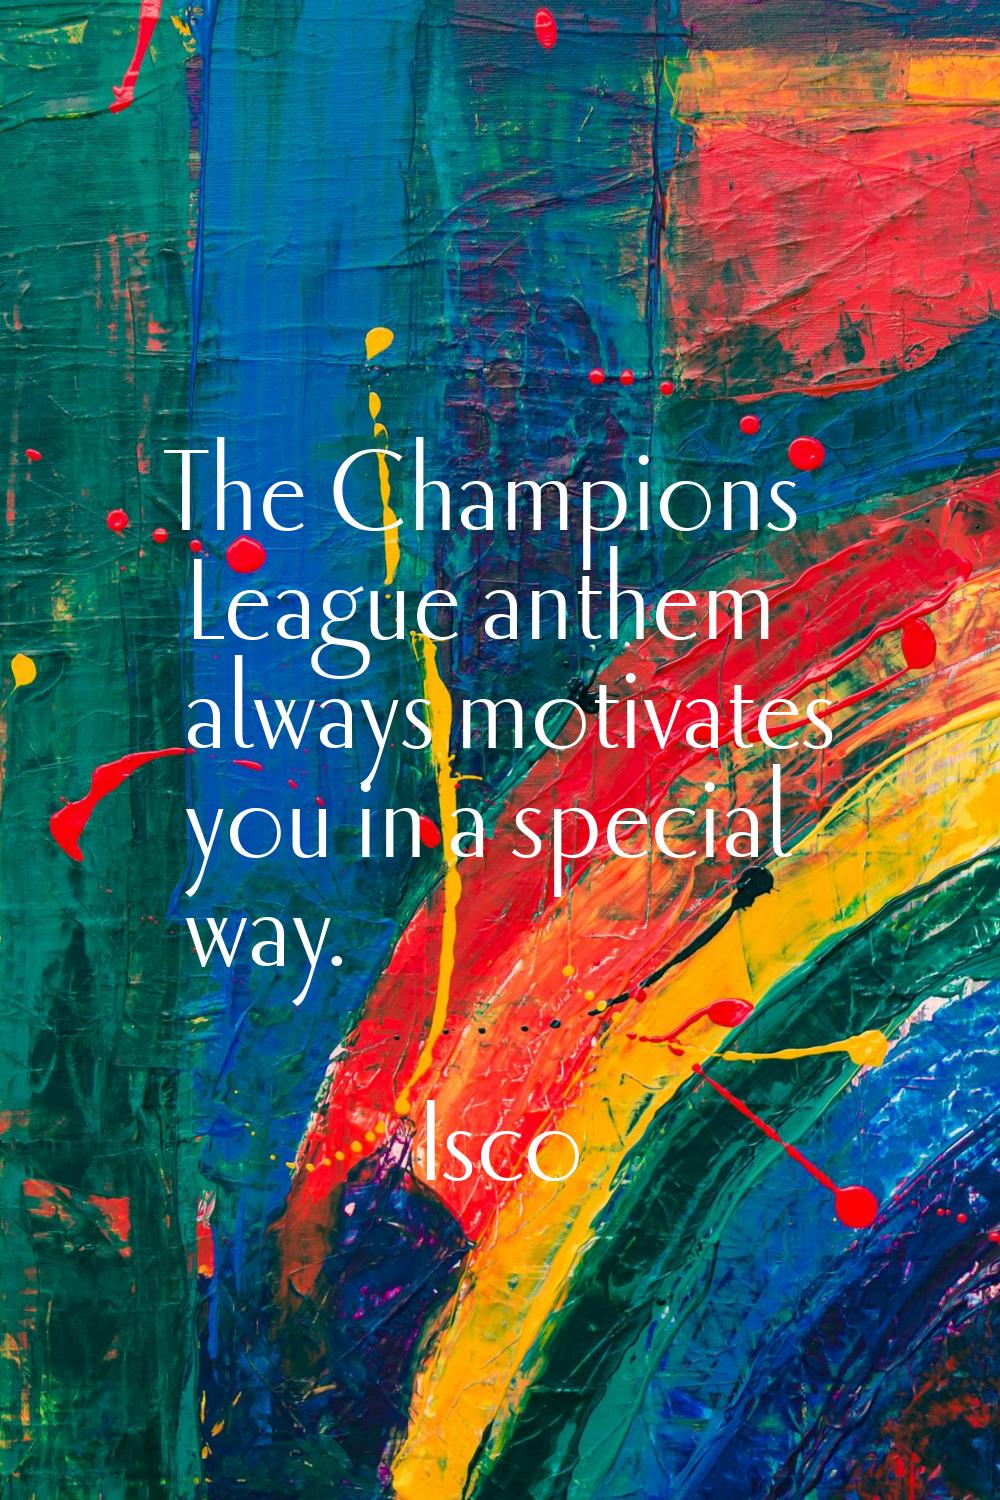 The Champions League anthem always motivates you in a special way.